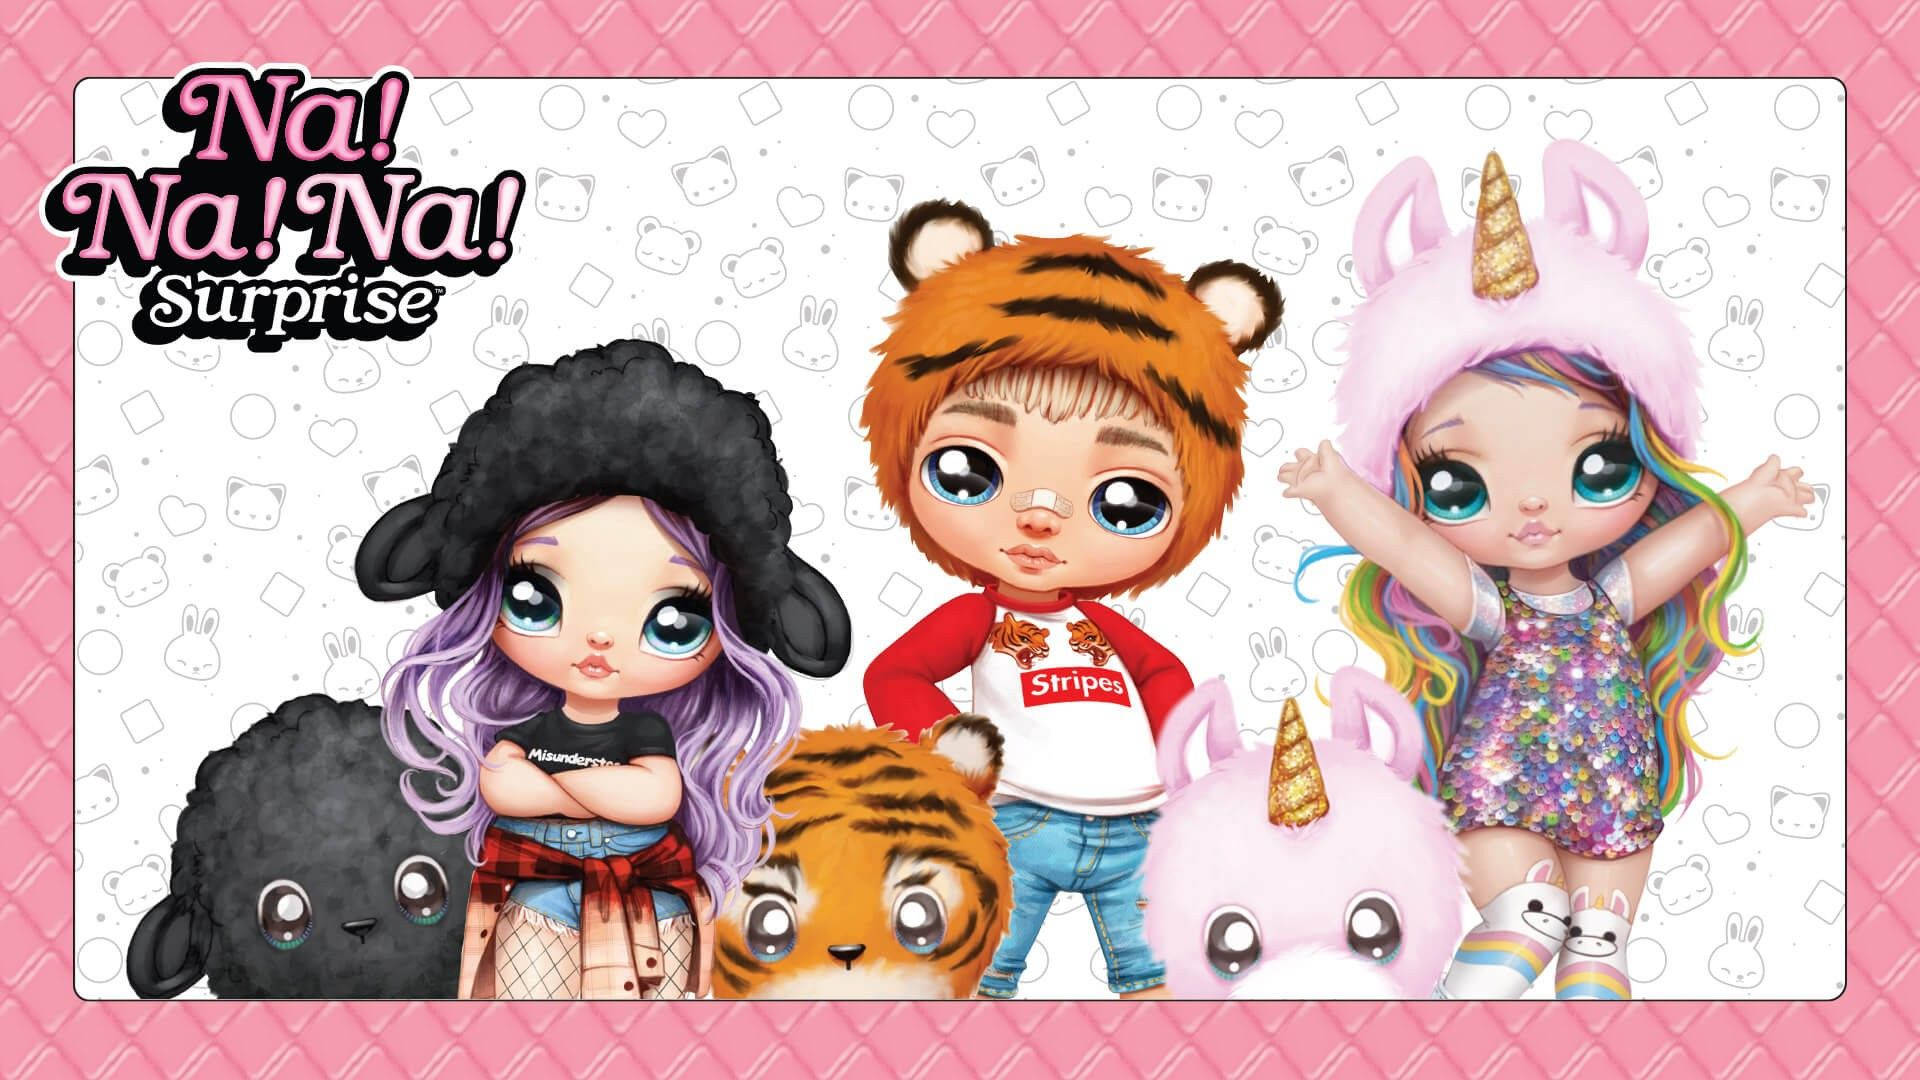 A Group Of Cartoon Characters With A Tiger And A Teddy Bear Background